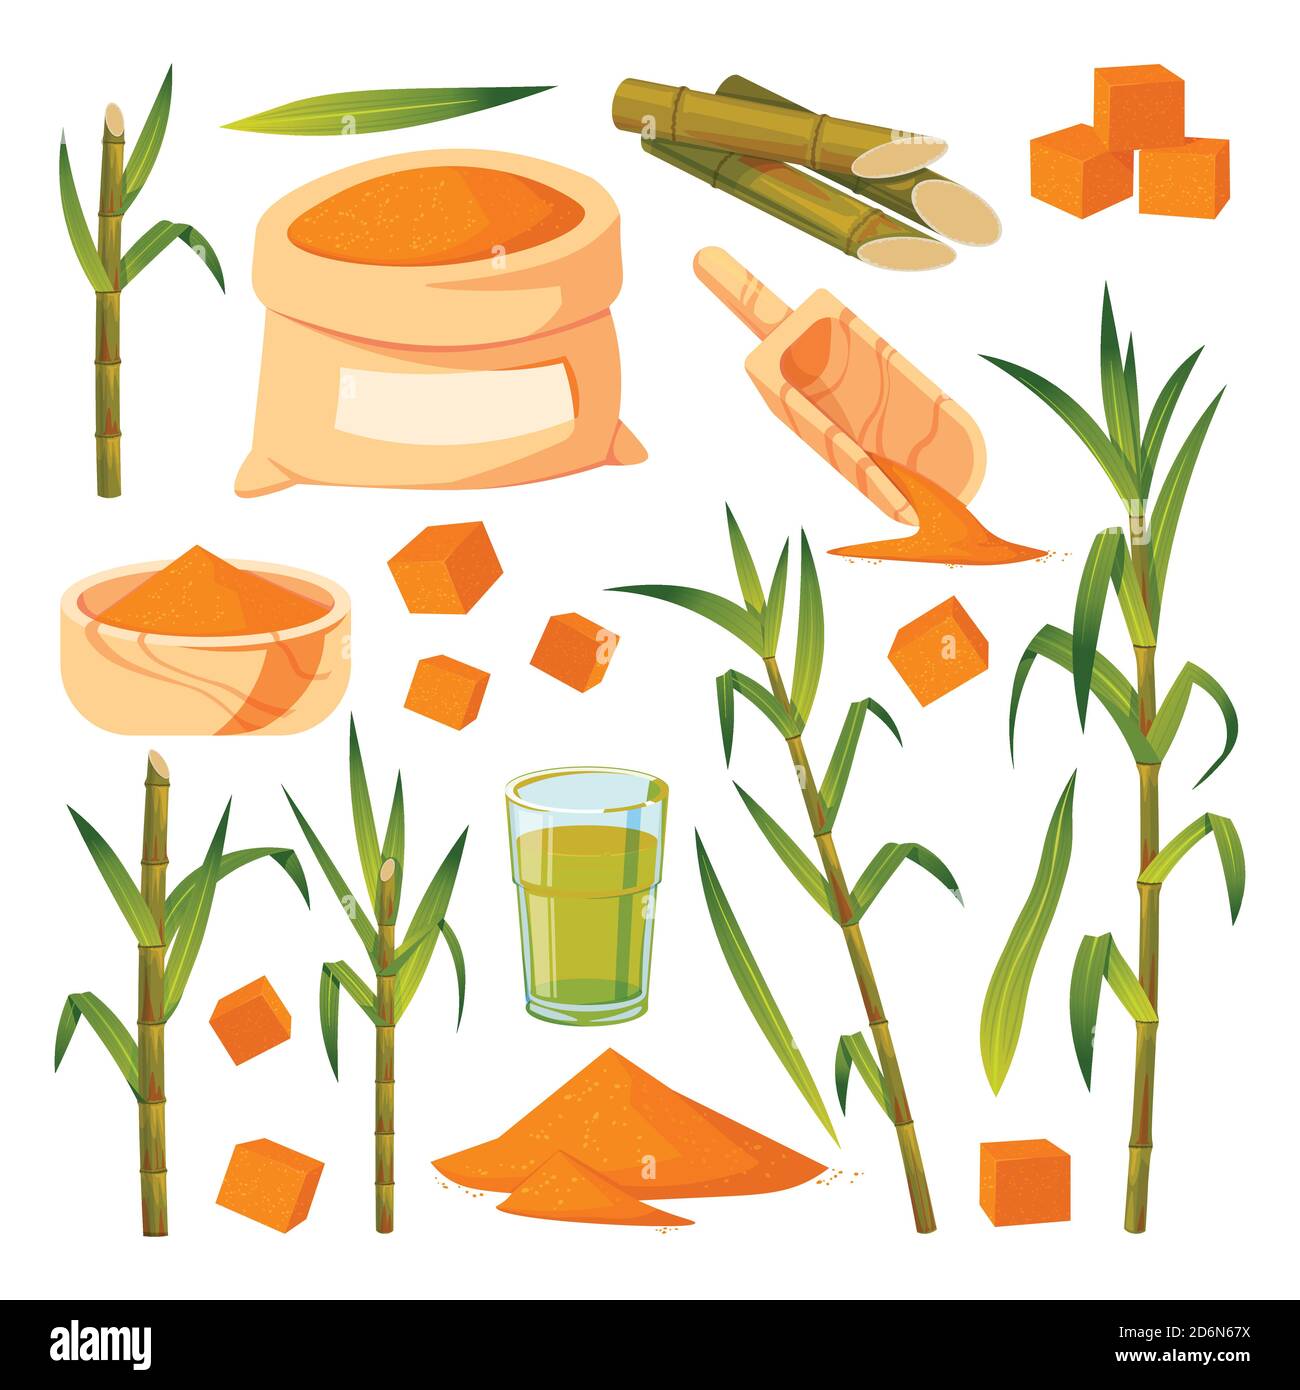 Sugar cane plant and green leaves vector flat cartoon illustration. Brown sugar in sack, bowl and spoon. Natural organic sweetener. Hand drawn isolate Stock Vector